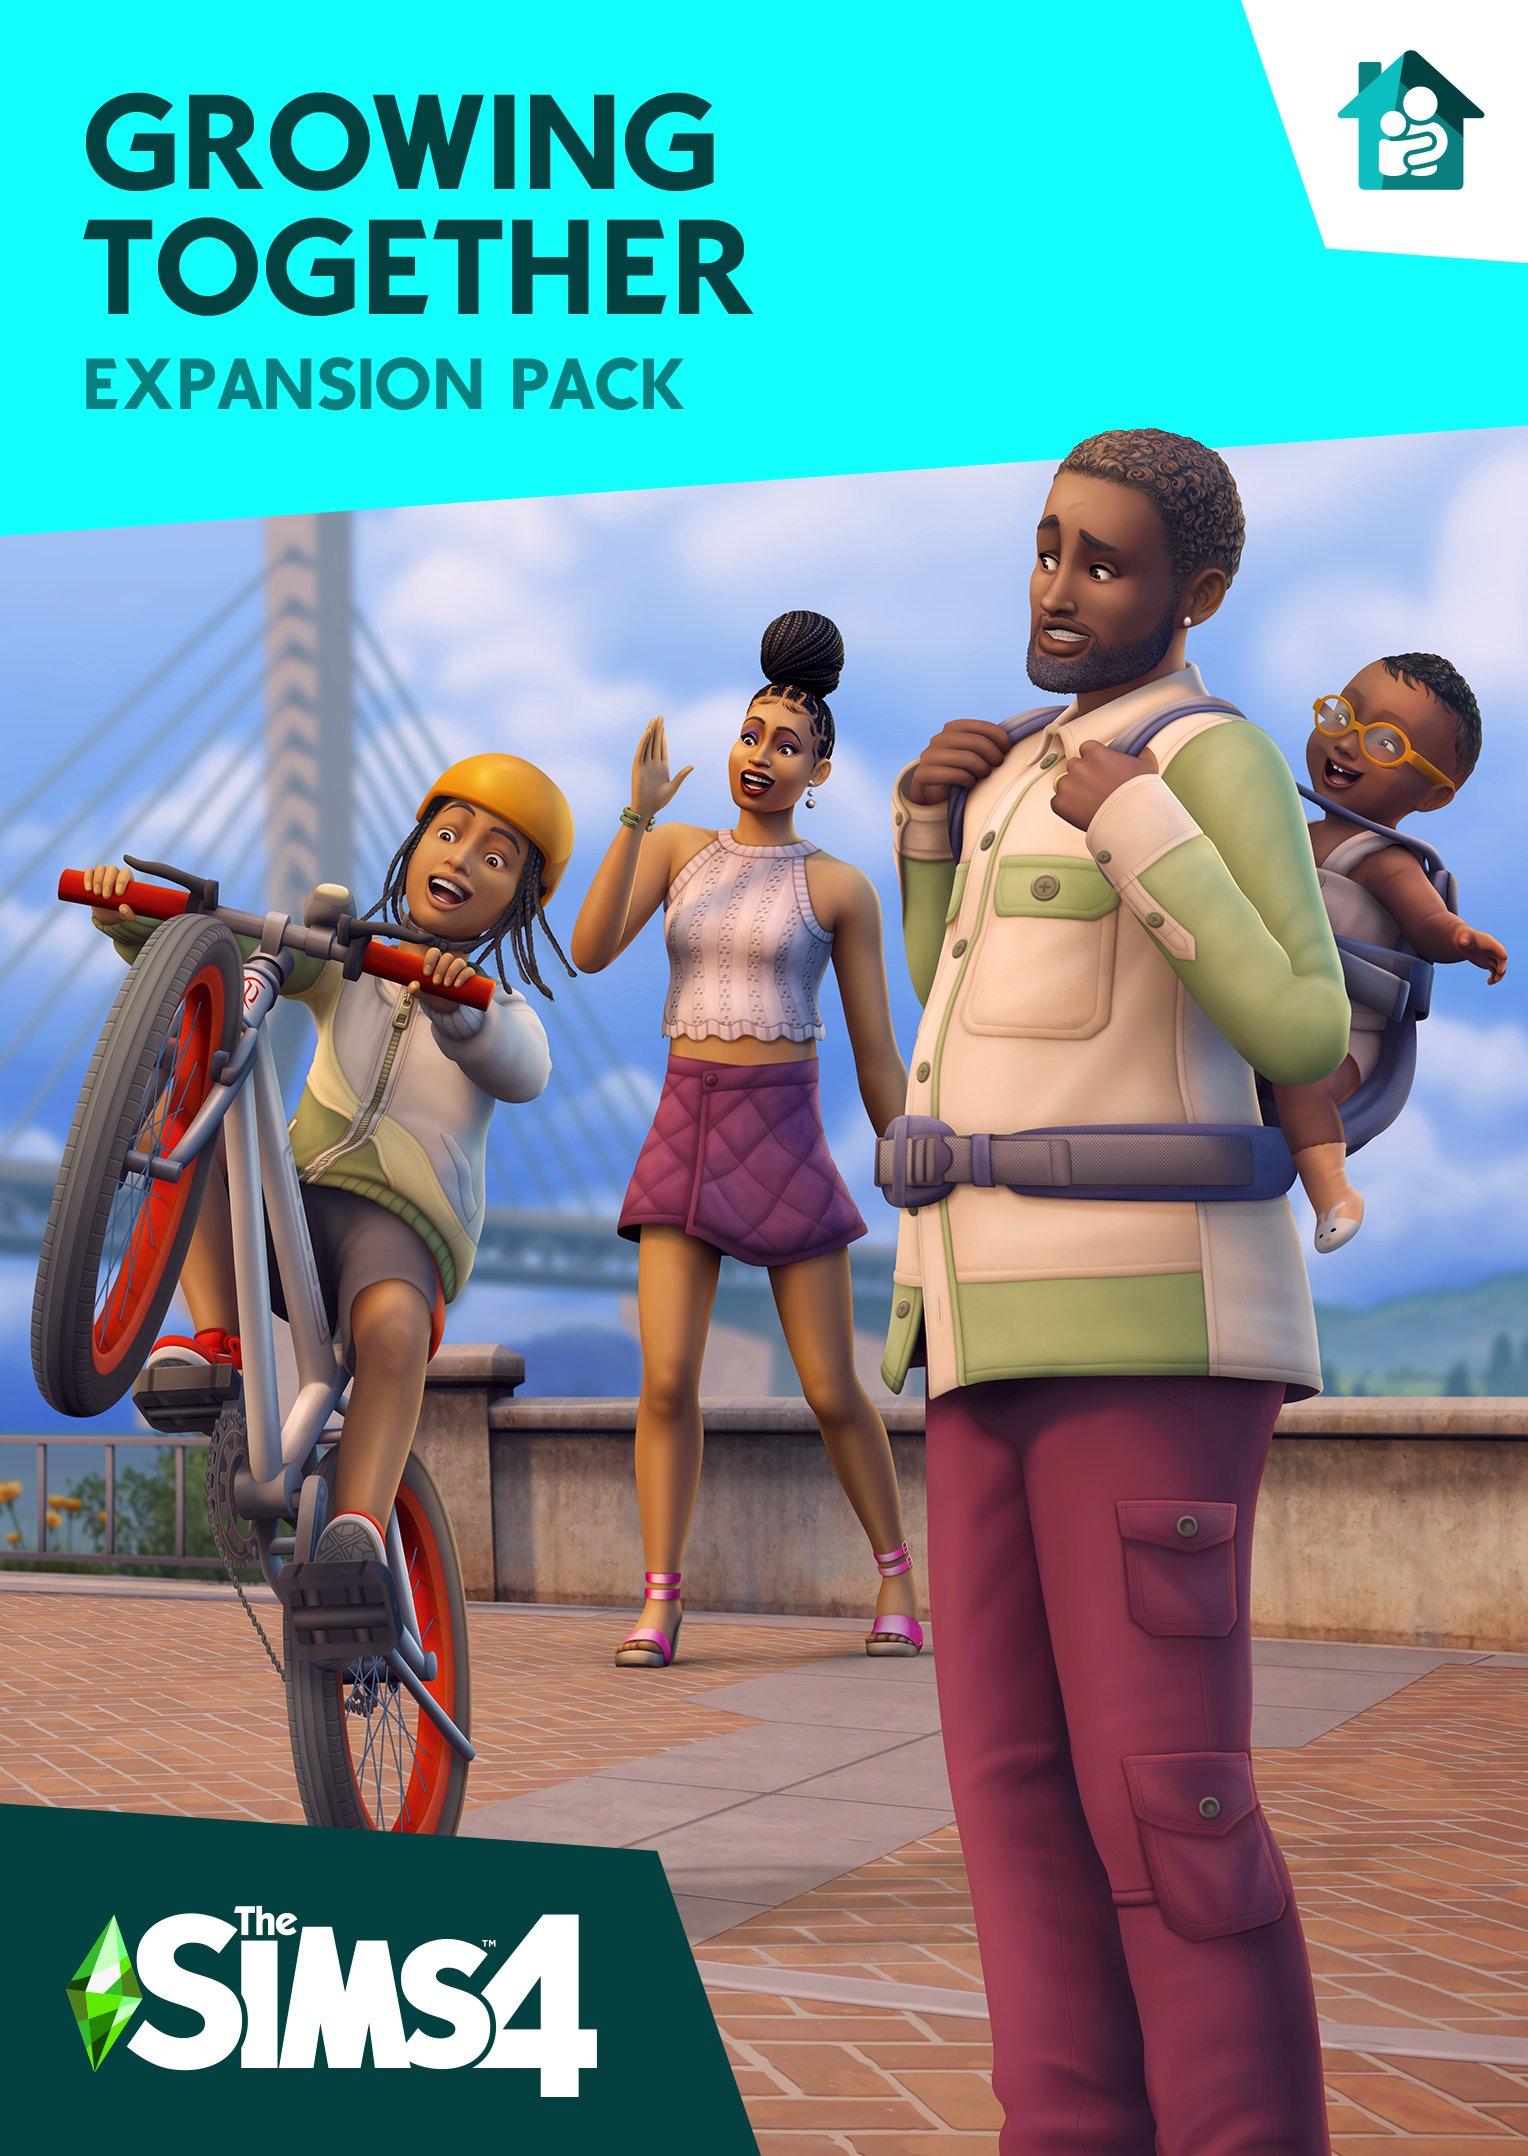 NEW SIMS 4 Free All DLC & Packs!  Use this Method to Get Sims 4 All Packs  Unlocked (All Platforms) 